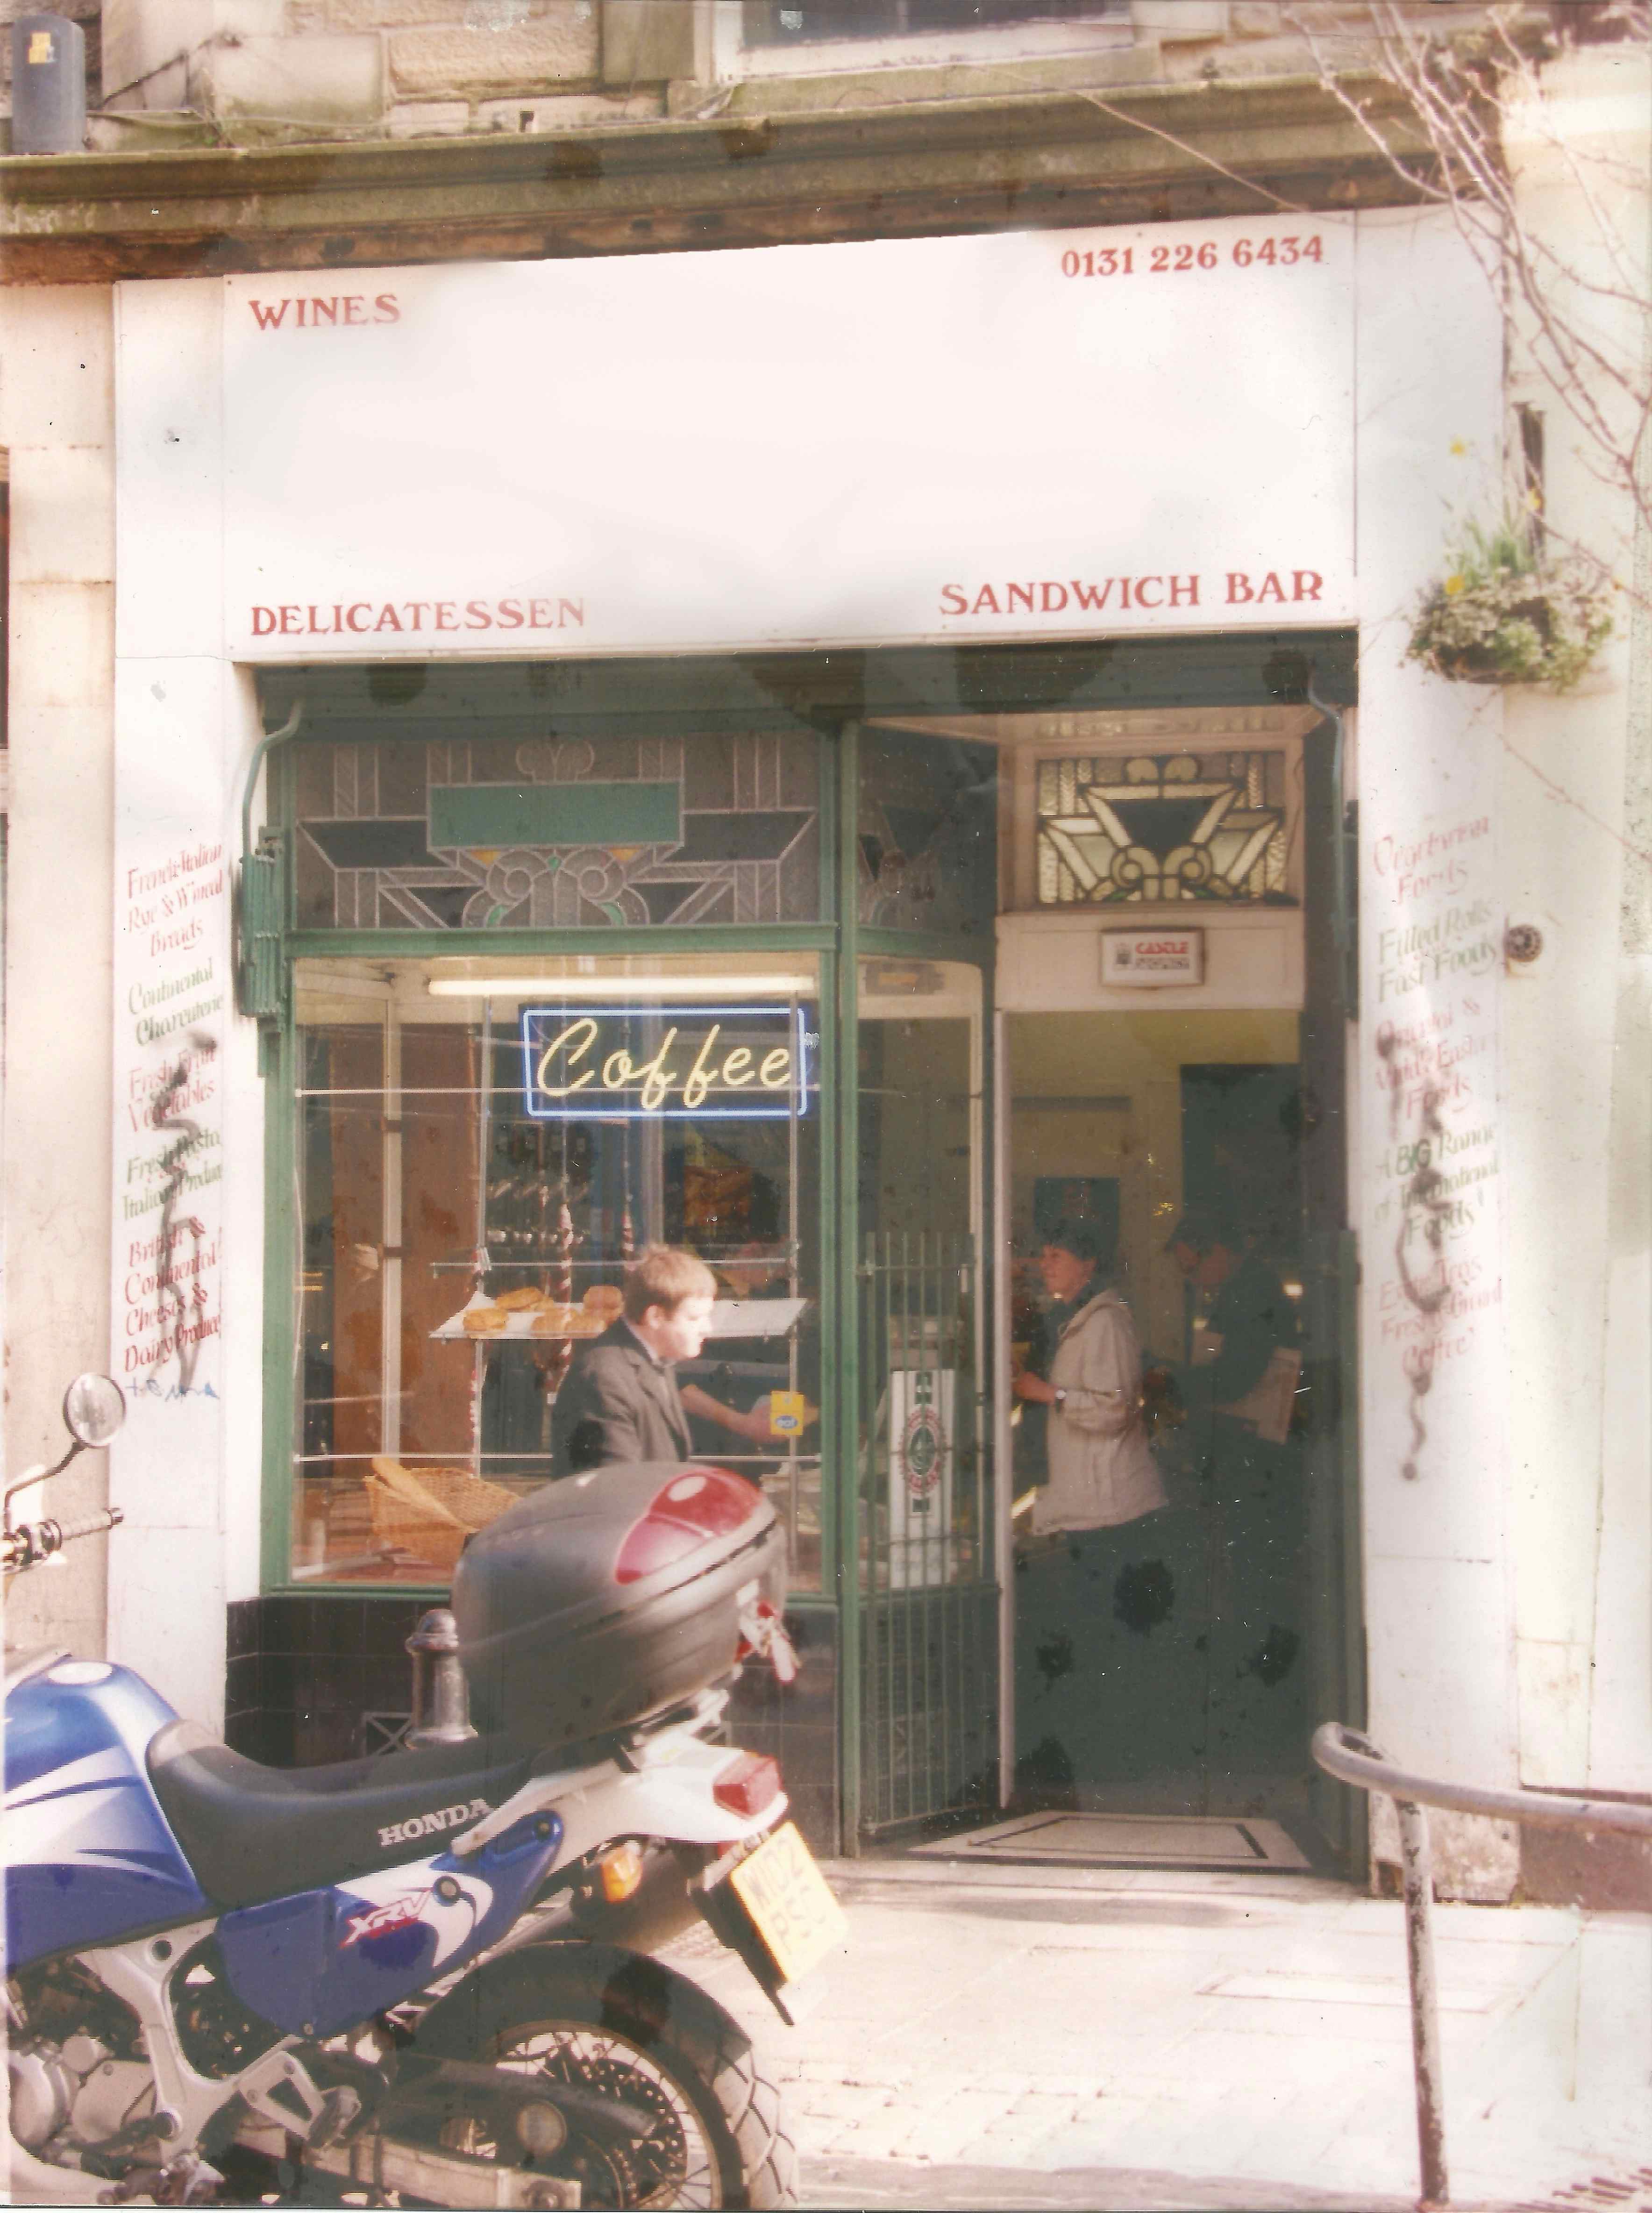 Background image of the cafe